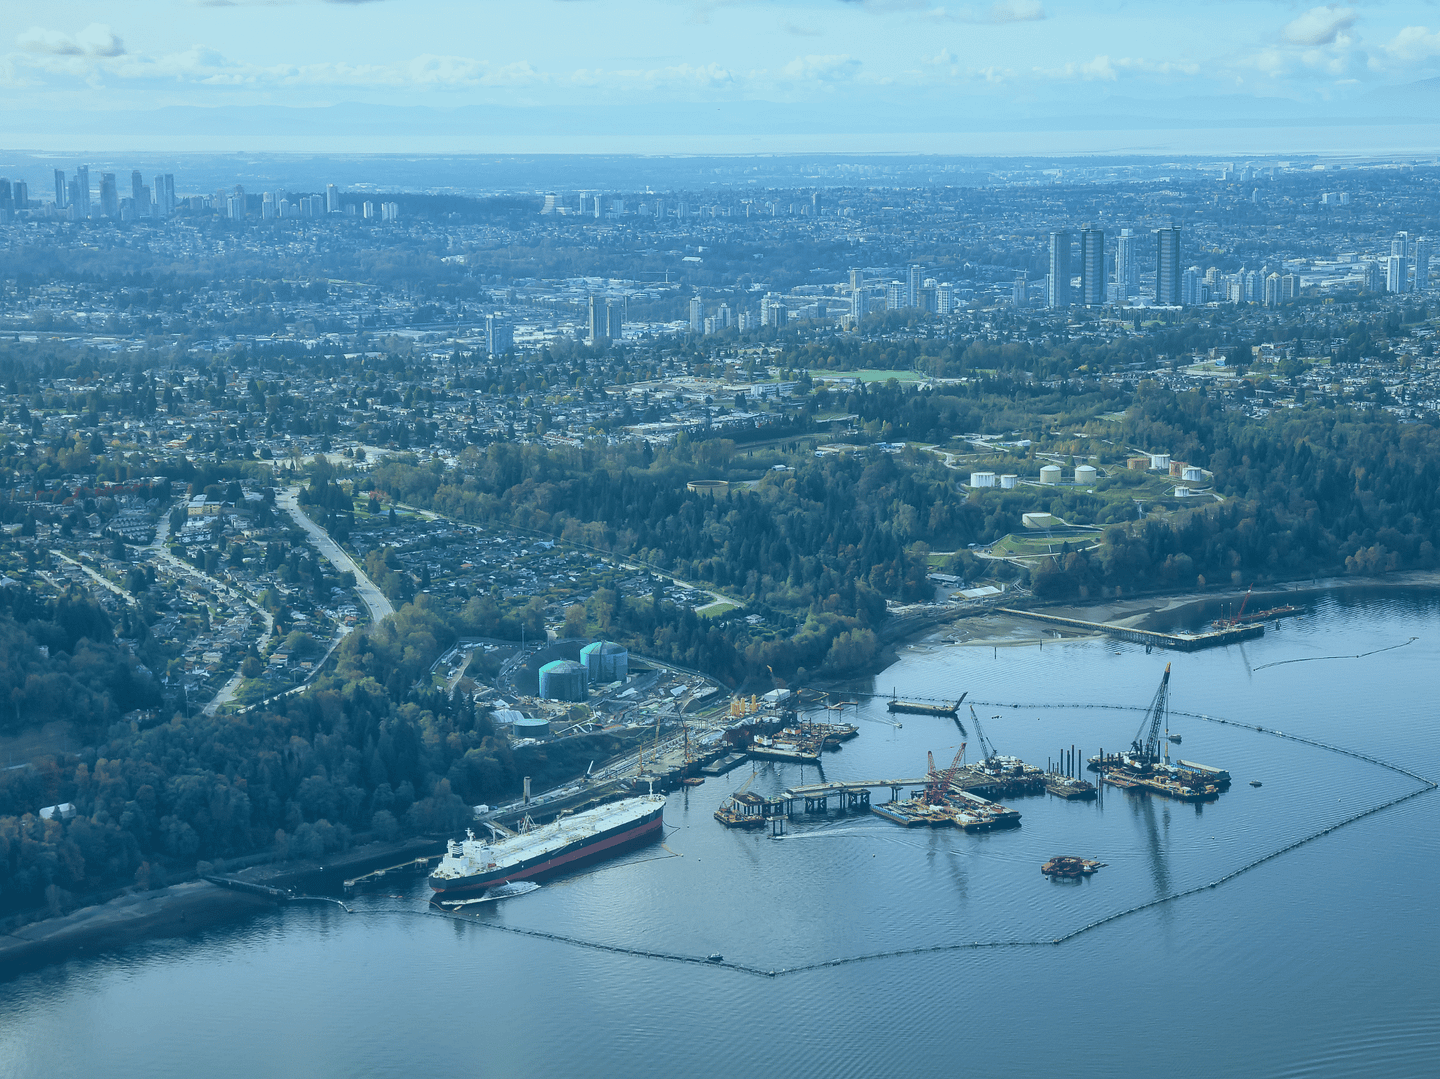 An aerial view of Port Moody, British Columbia docks